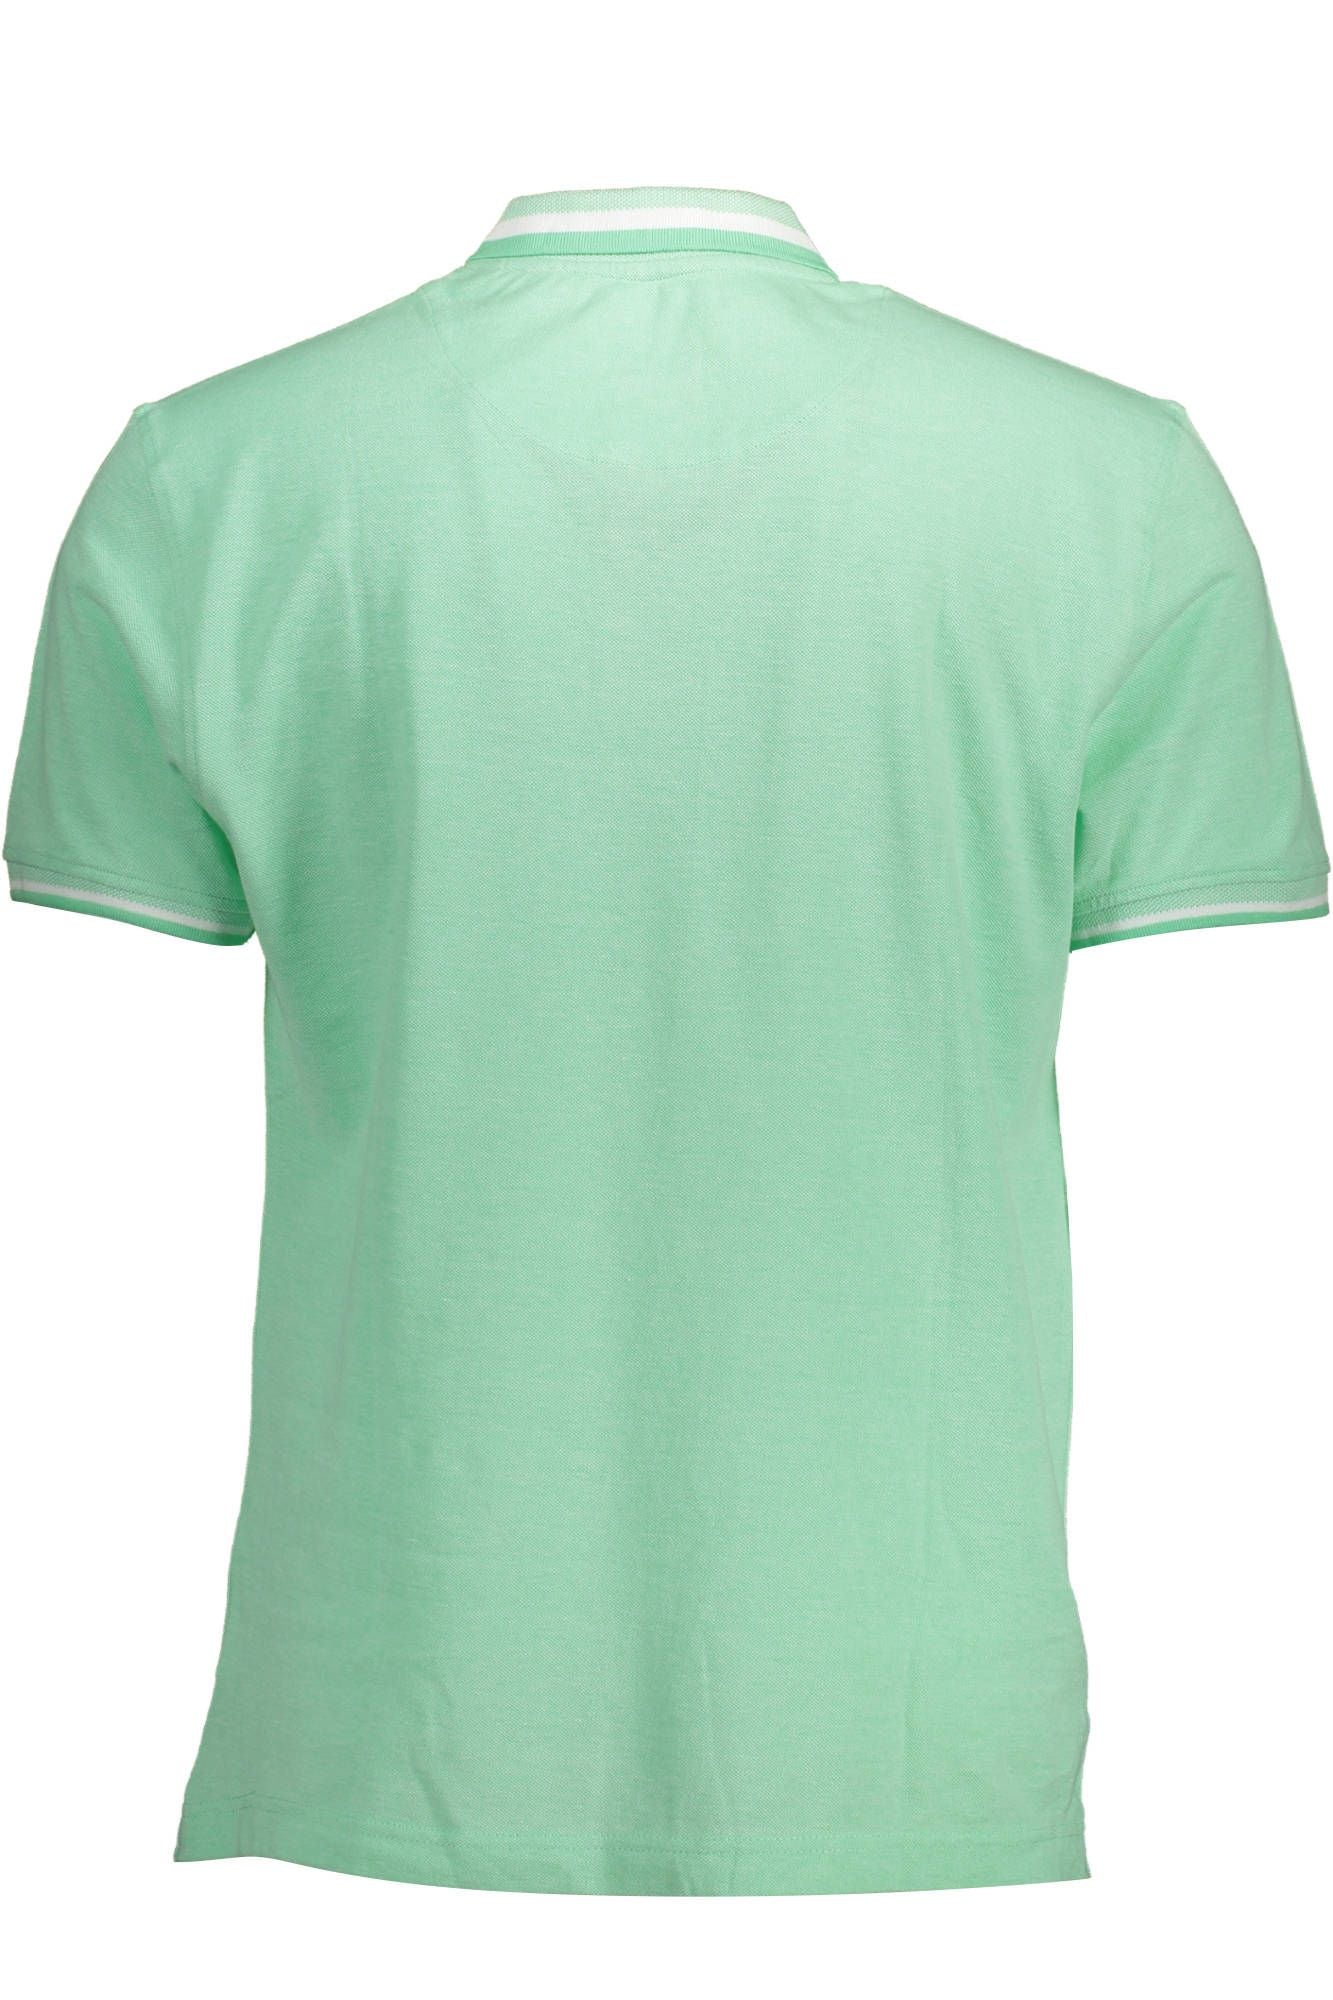 Harmont & Blaine Elegant Green Cotton Polo with Contrasting Accents